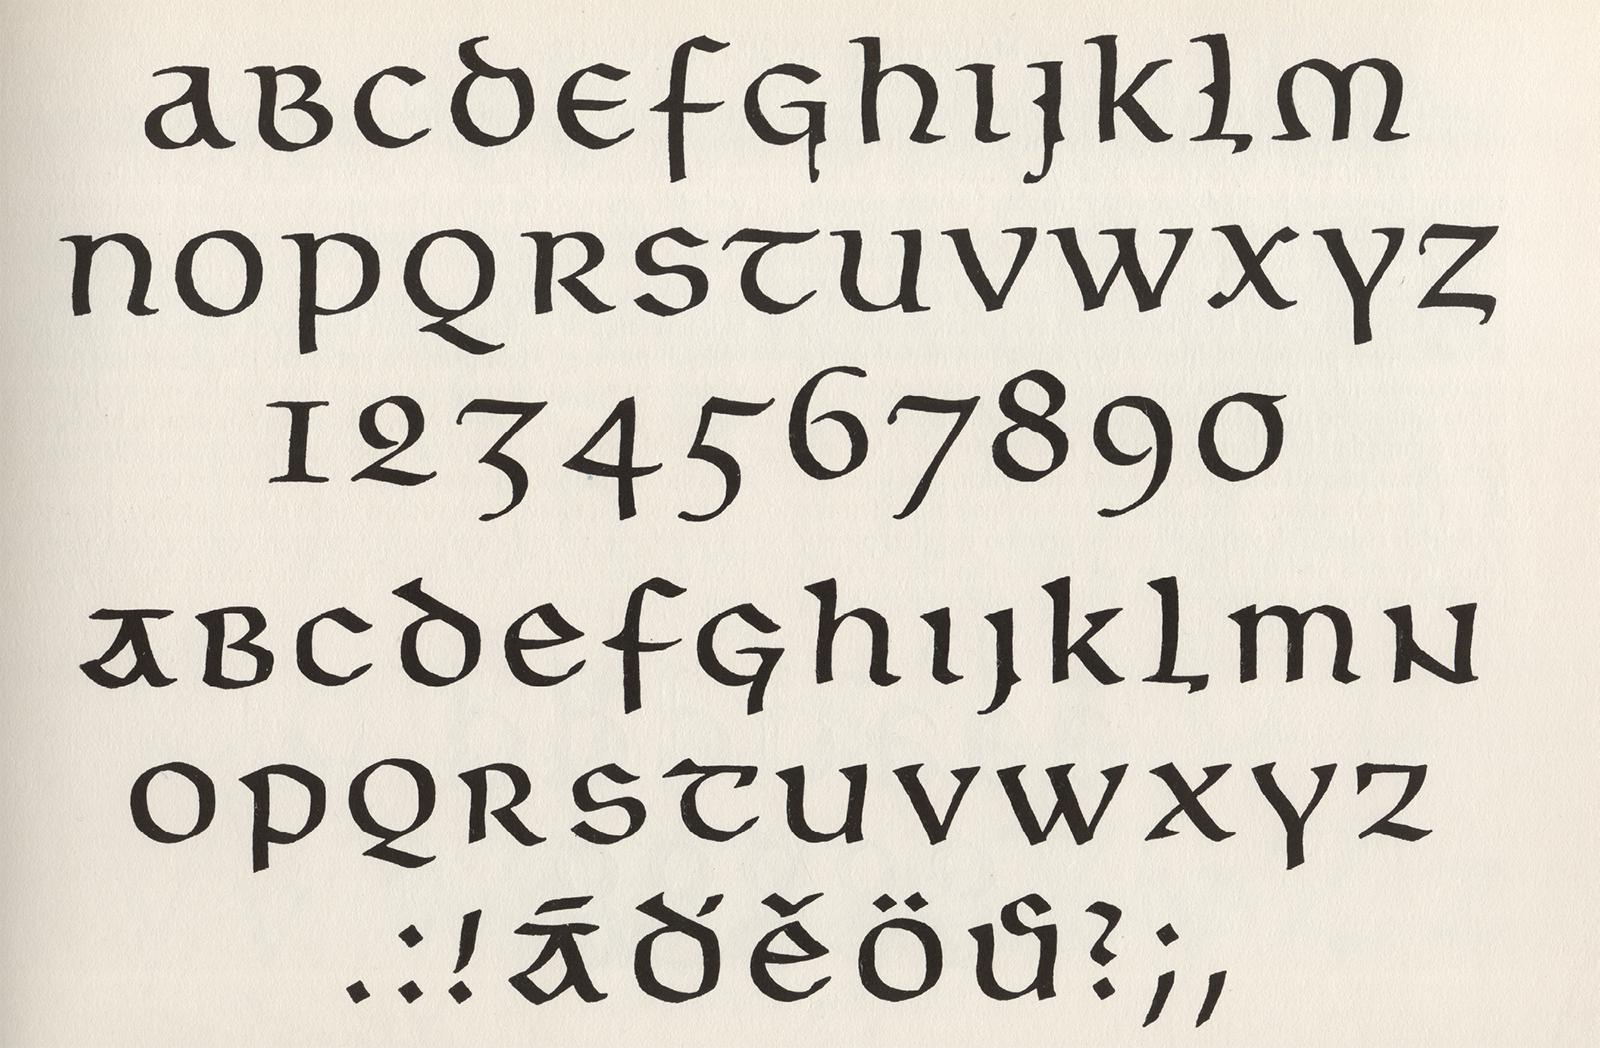 Two shape variants of uncial letterforms which were the model for the Česká Unciála typeface. A table from Menhart’s publication: Nauka o písmu [Teachings on Type], State Pedagogical Publishing House, Prague 1954.